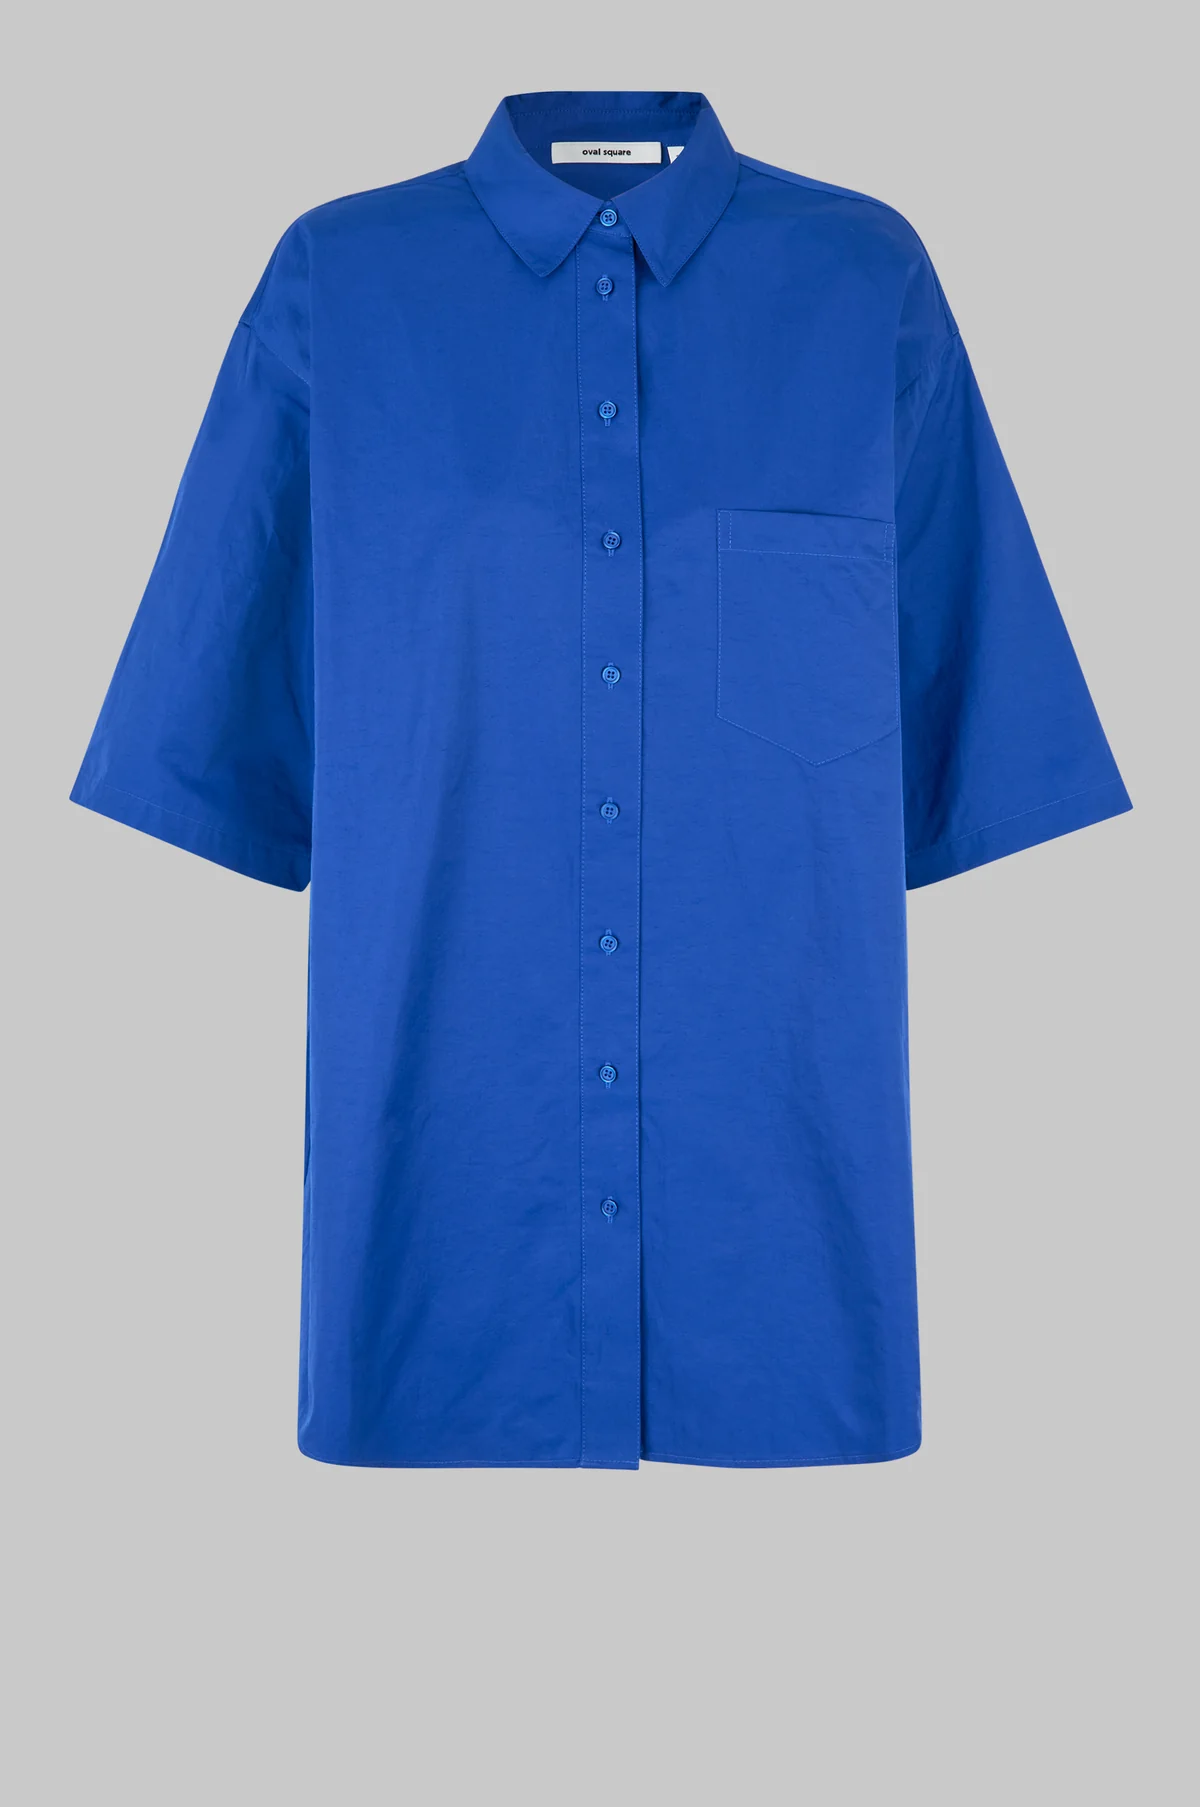 OVAL SQUARE Os work shirt